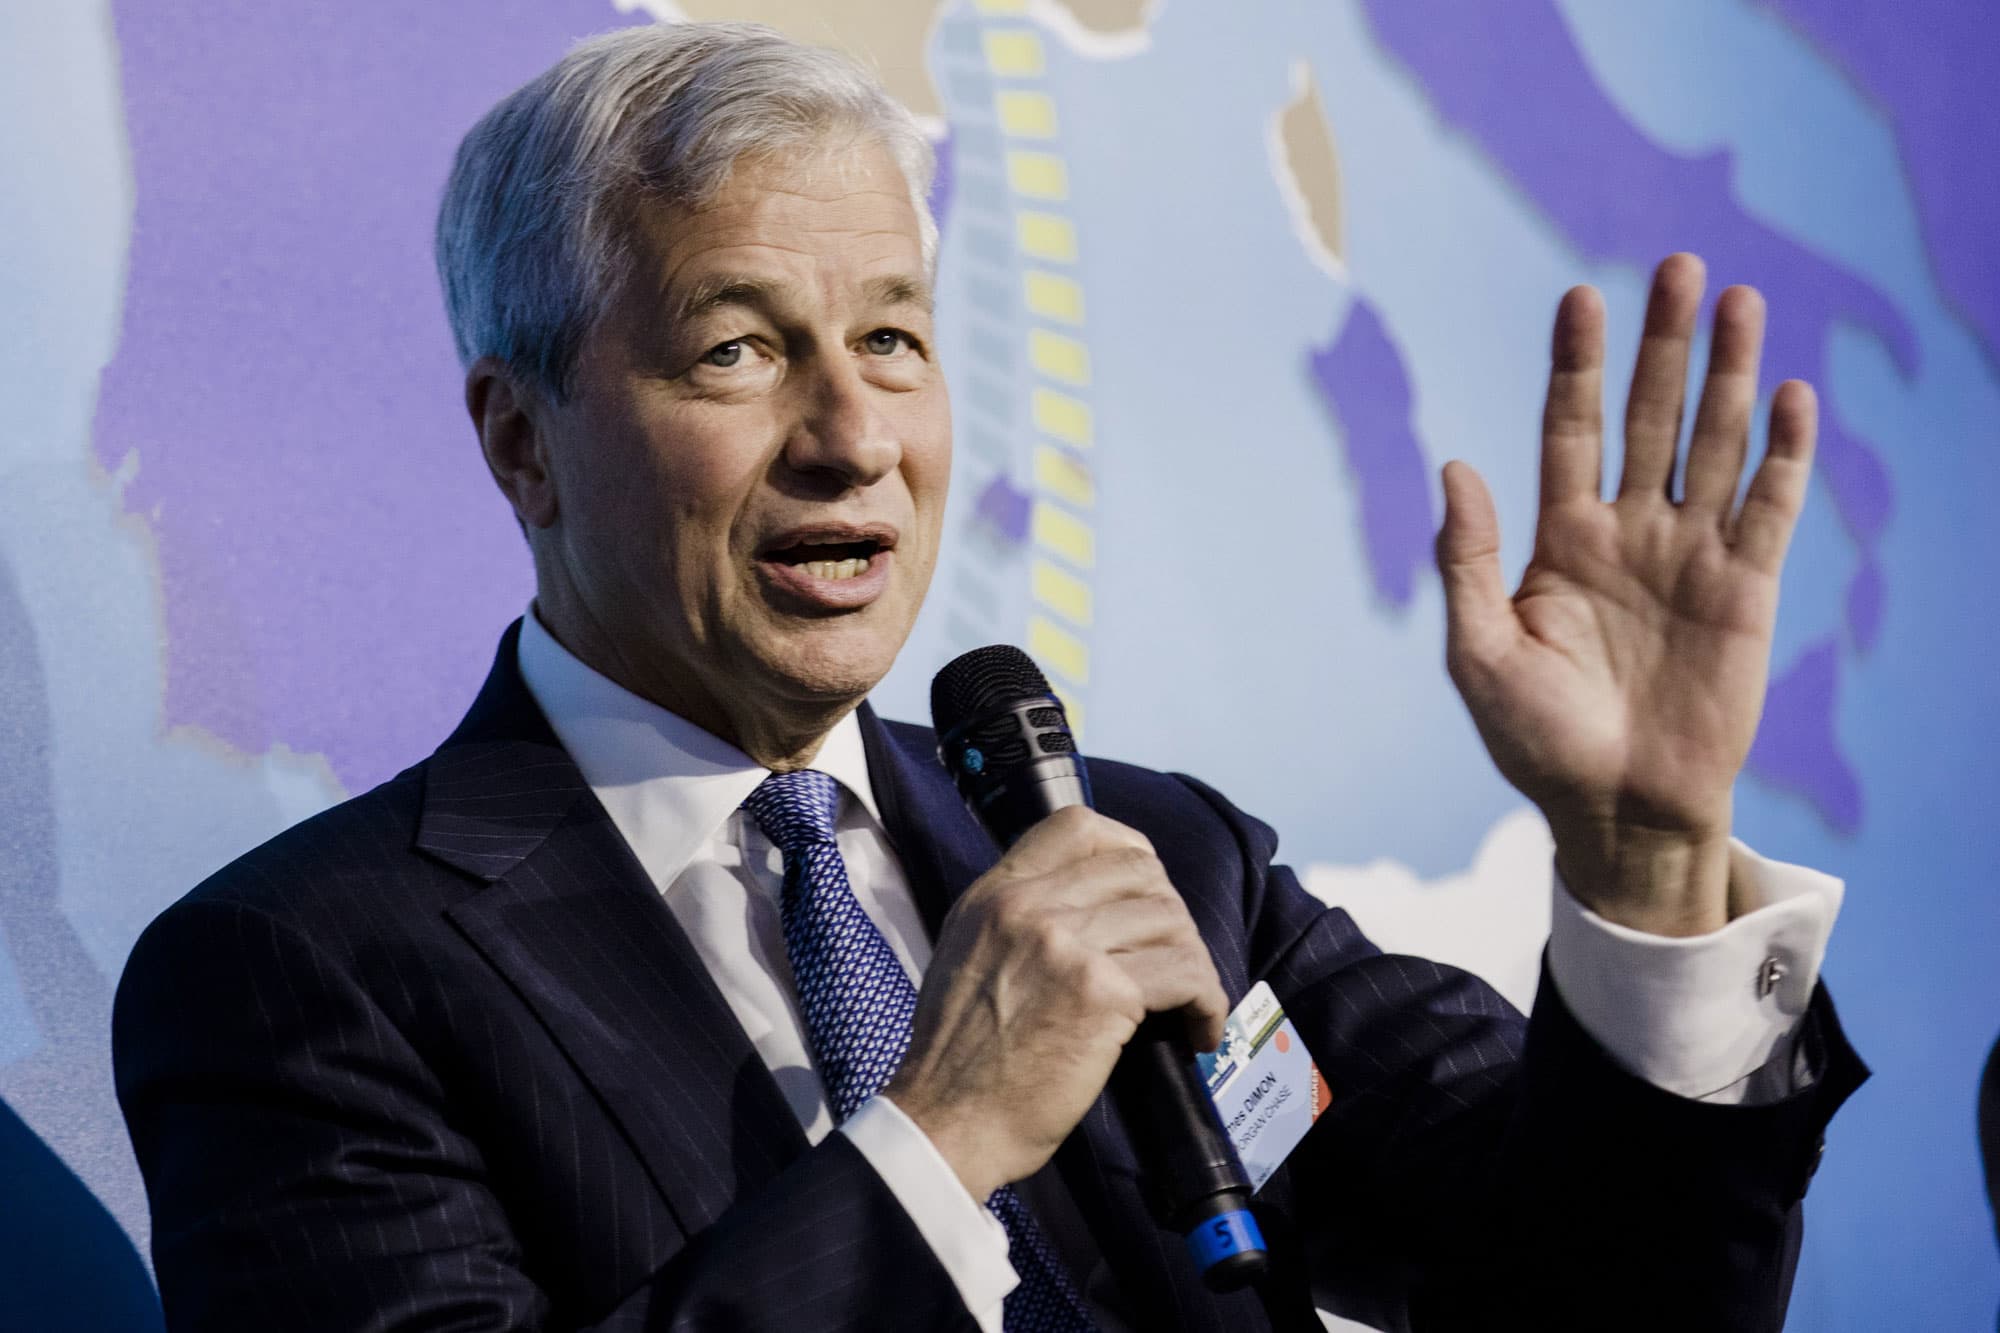 Jamie Dimon says JPMorgan is hoarding cash because 'very good chance' inflation is here to stay